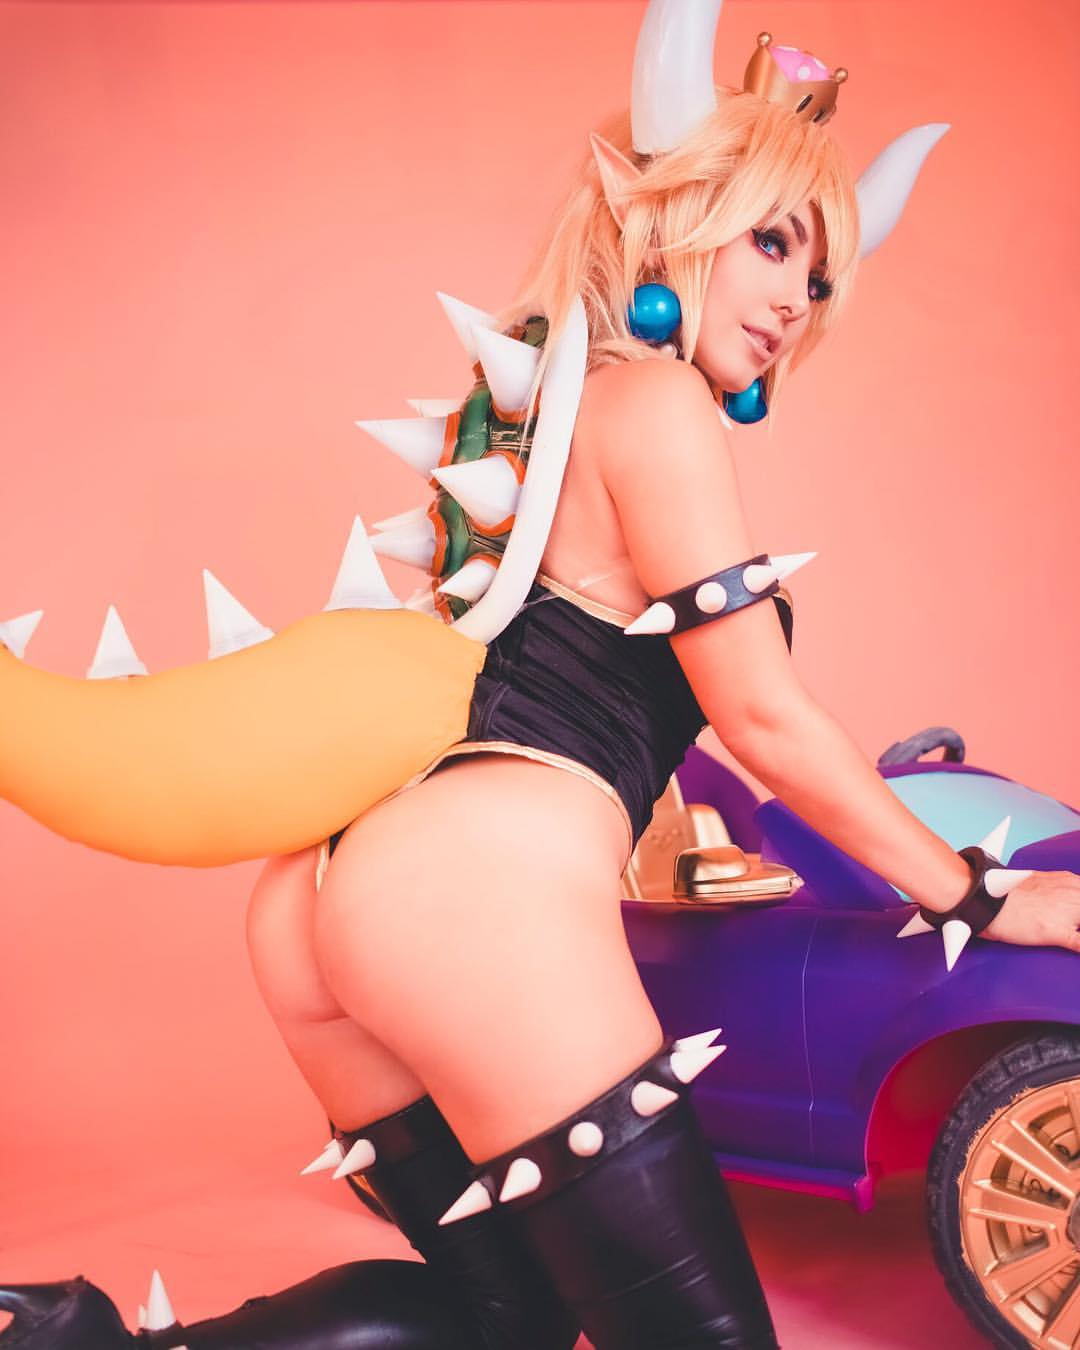 49 Hottest Jessica Nigri Big Butt Pictures Which Are Sure to Catch Your Attention | Best Of Comic Books